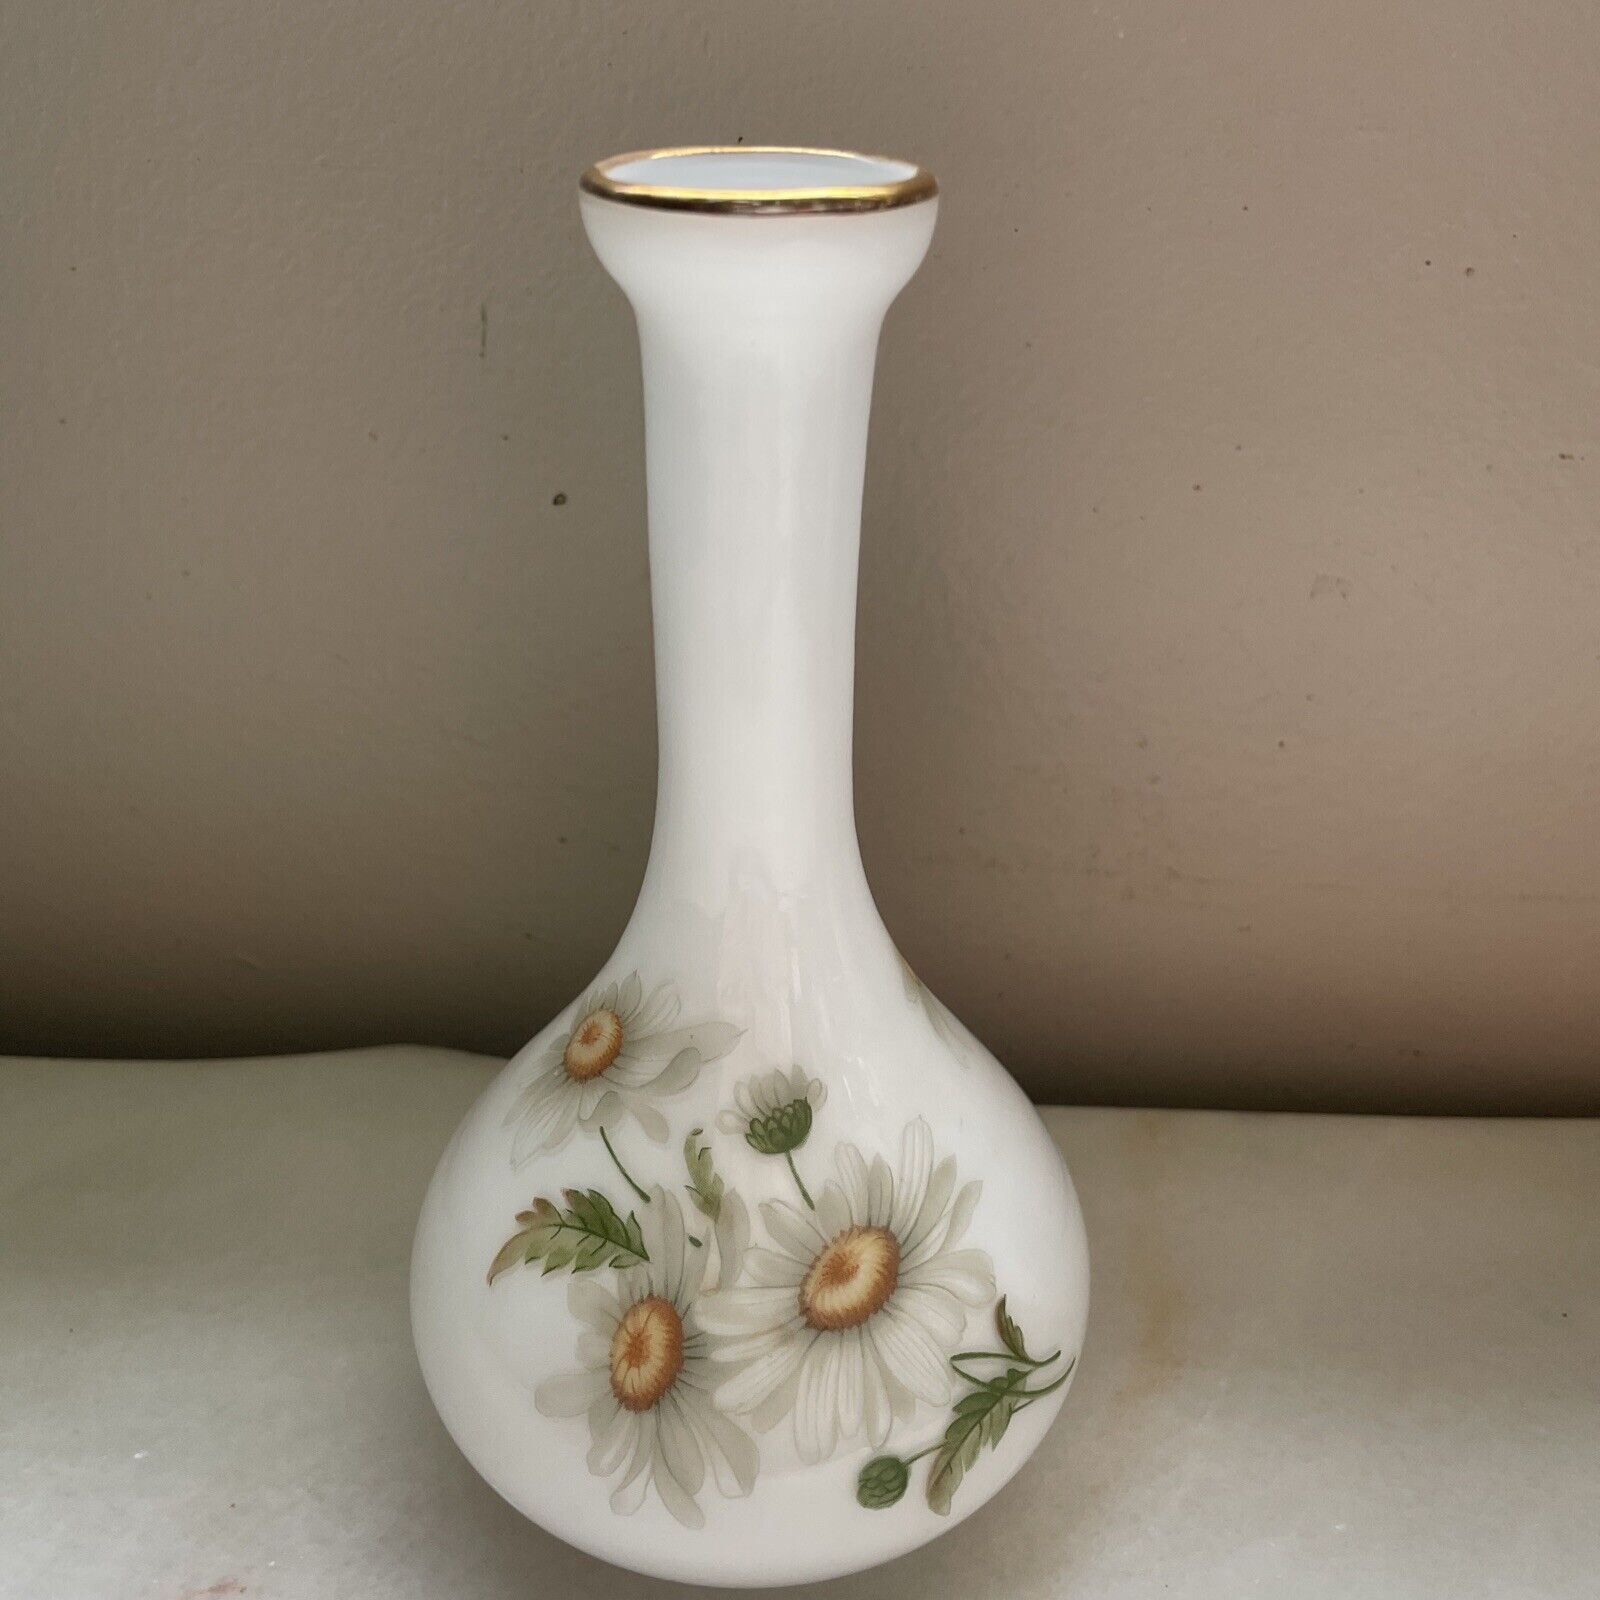 VTG HAND BLOWN WHITE OPAQUE GLASS BUD VASE GOLD RIM HAND PAINTED DAISIES